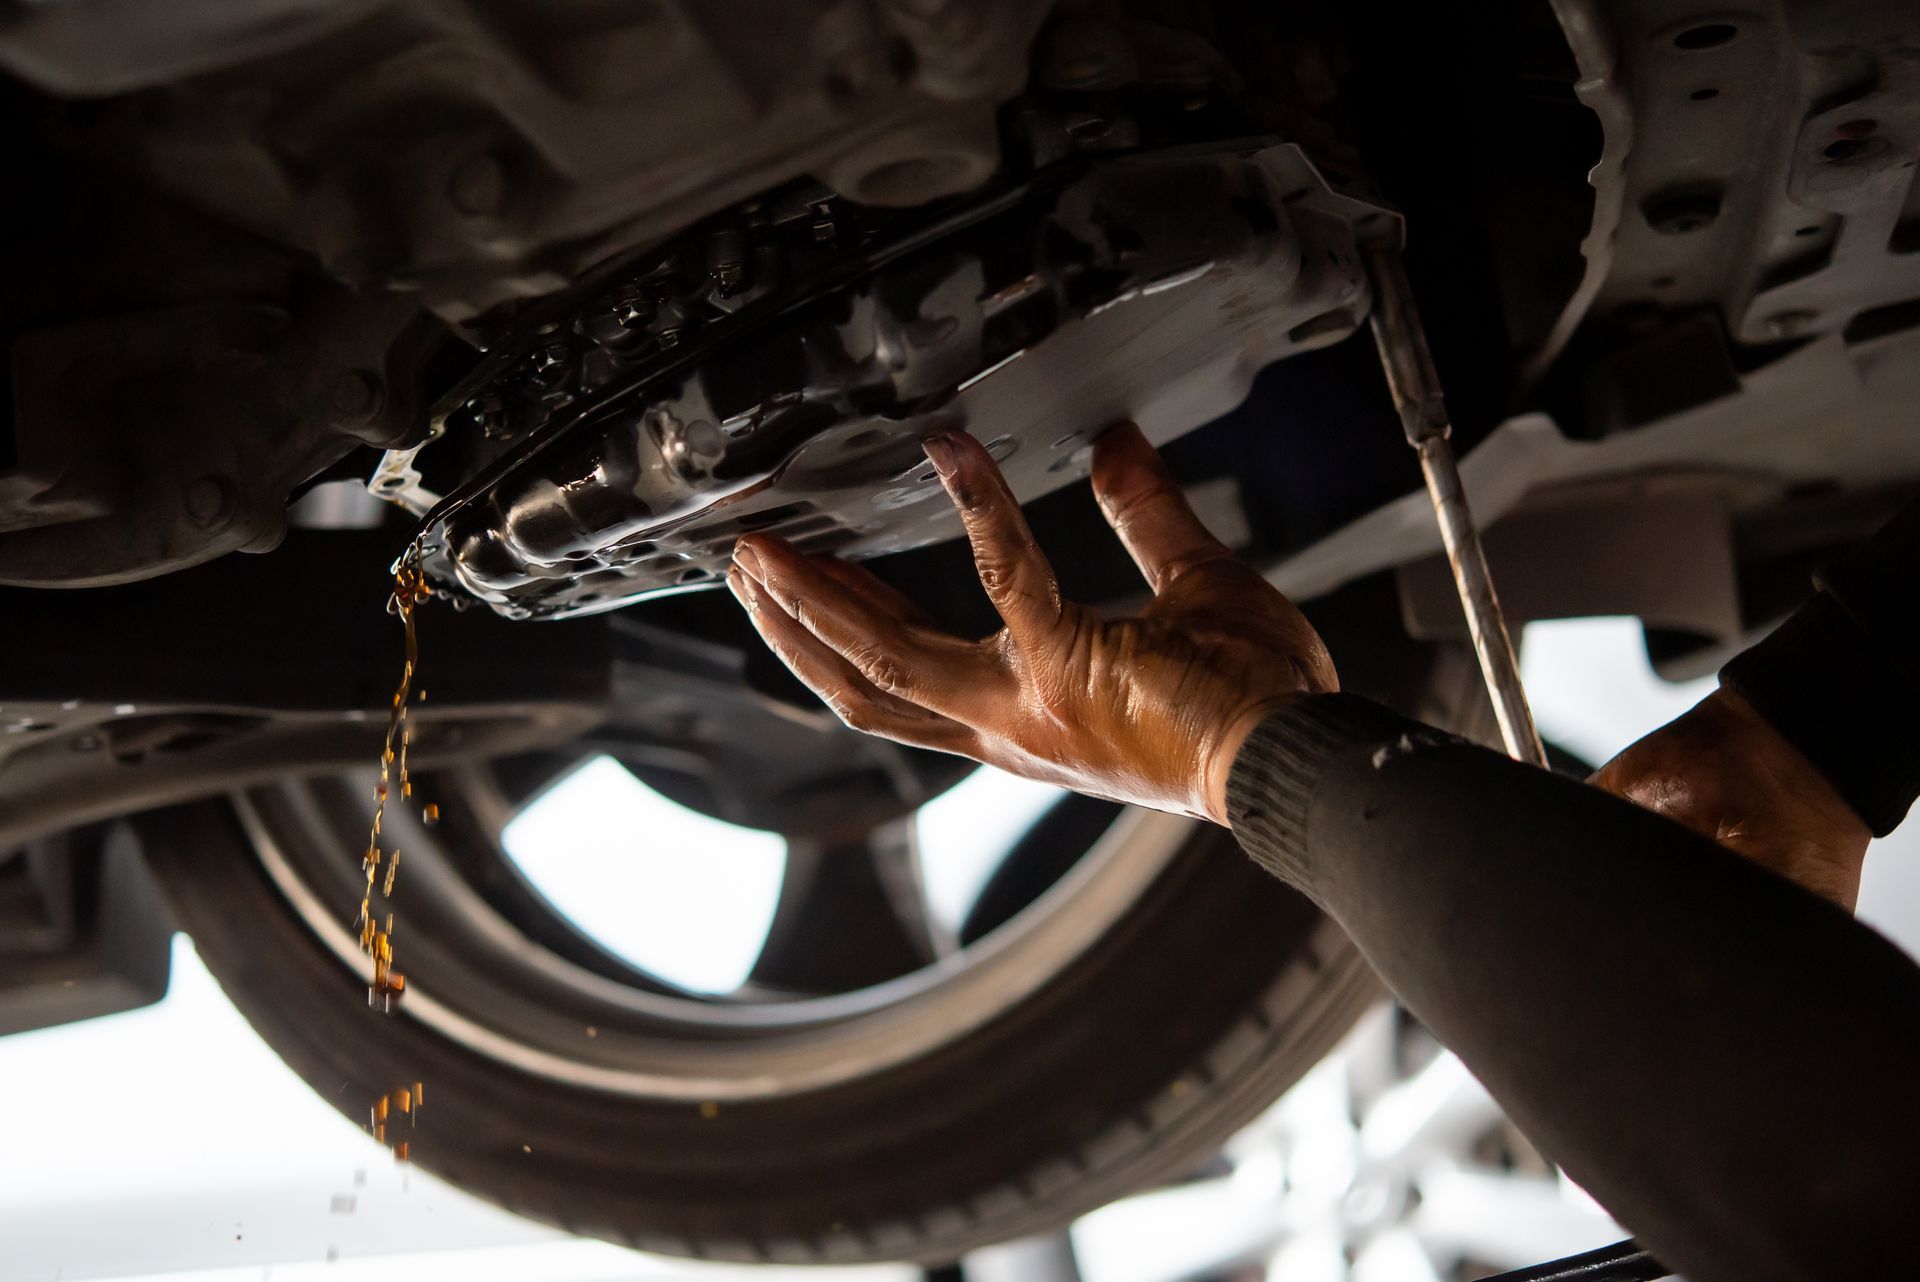 A person is changing the Transmission fluid | C&C Tire Inc.